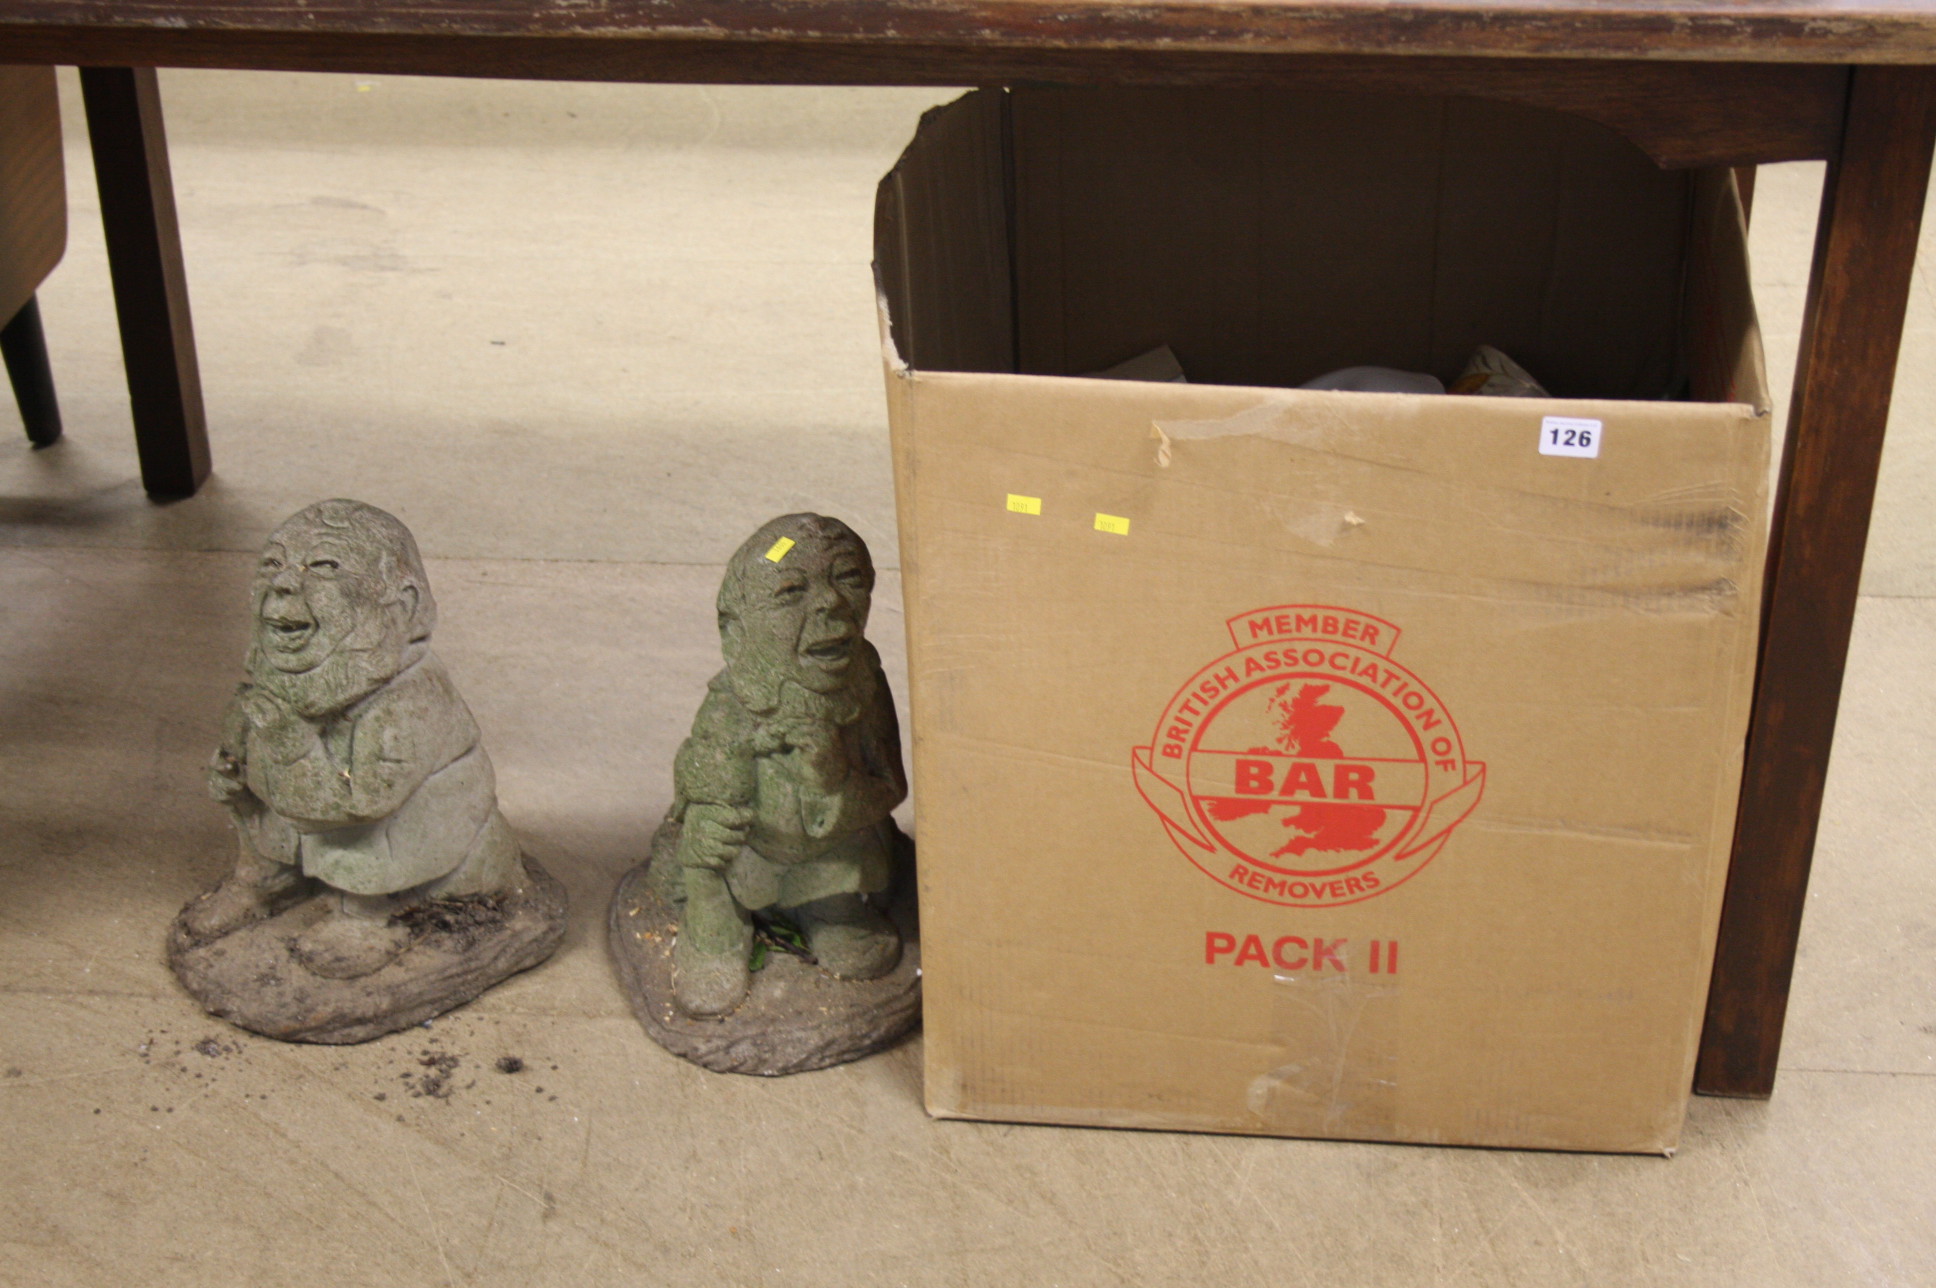 2 Stone garden ornaments and box of assorted